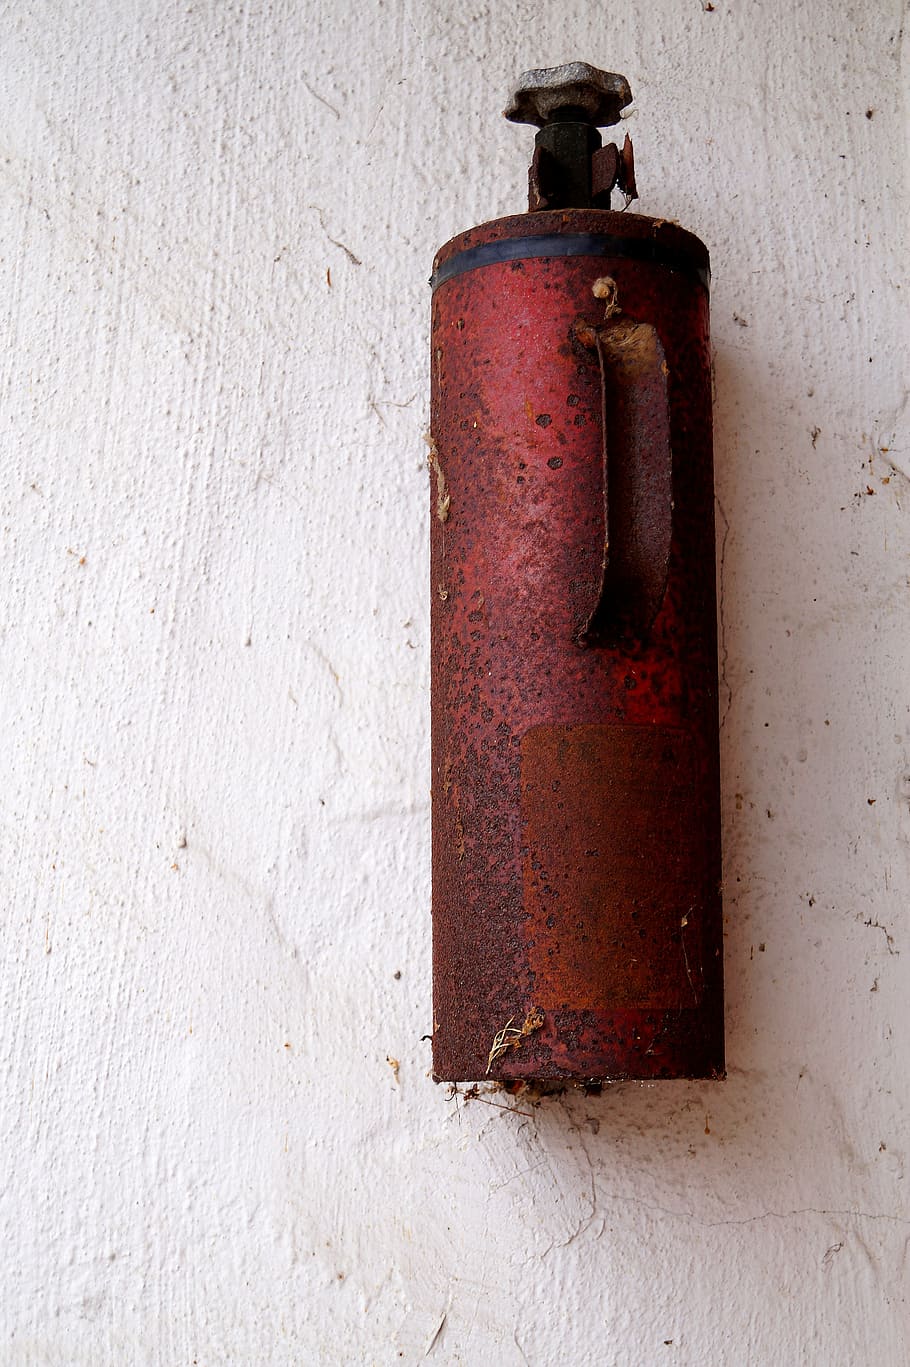 fire extinguisher, old, rusted, forget, security, decay, metal, rusty, wall - building feature, weathered